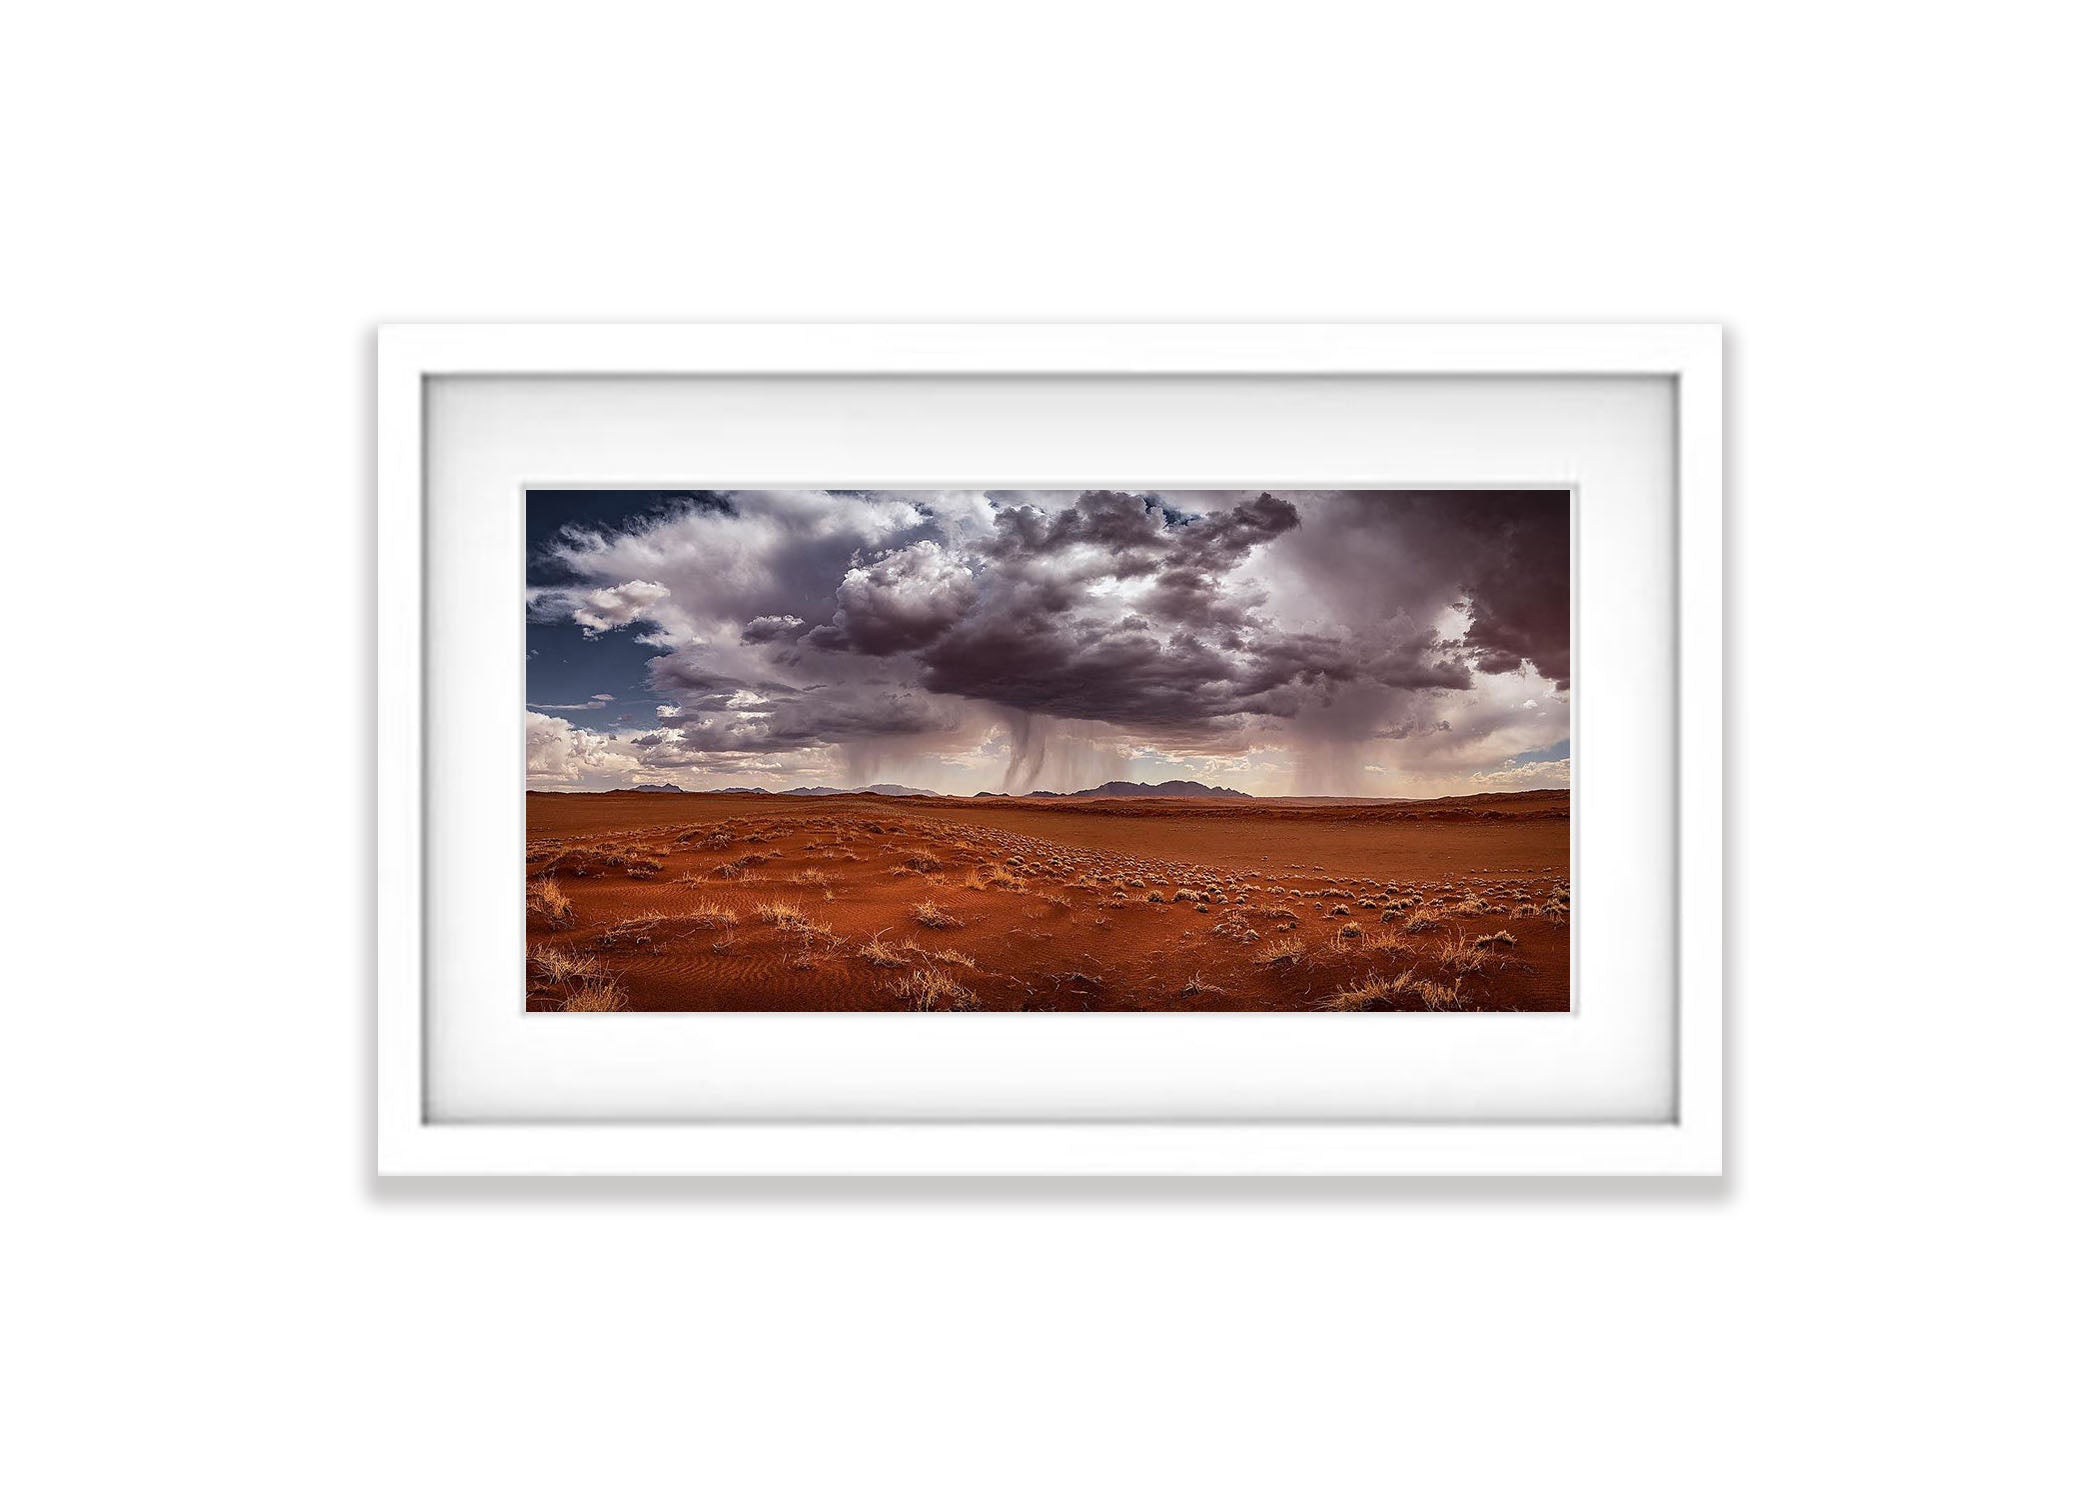 Afternoon Storm - Wolwedans, Namibia